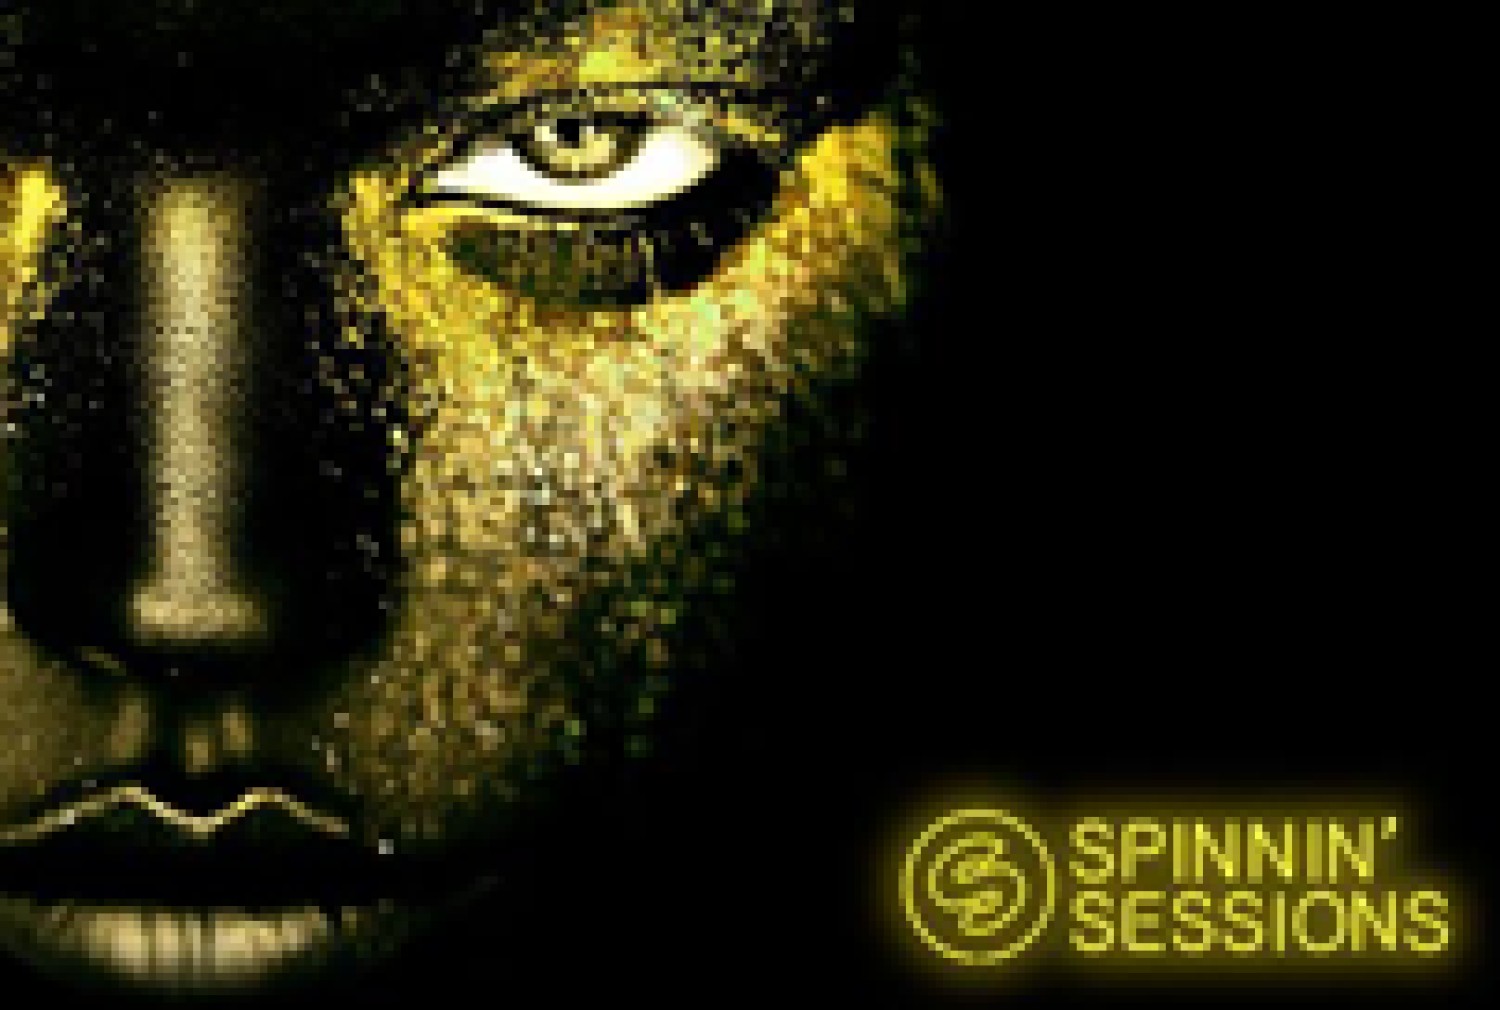 Party report: Spinnin' Sessions, Amsterdam (17-10-2014)